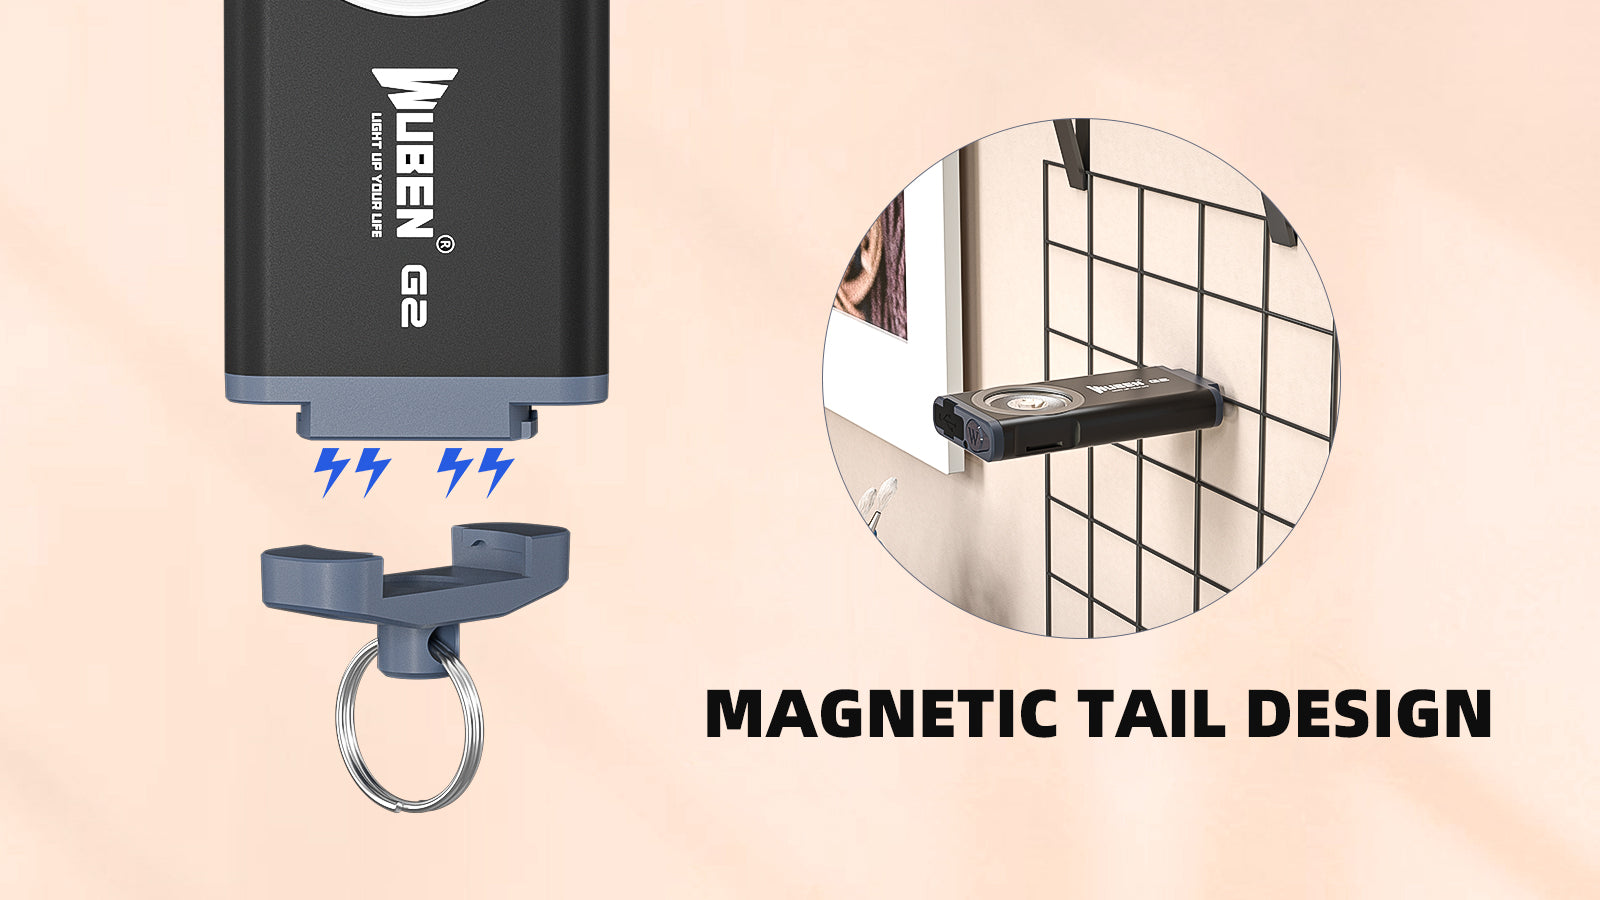 MAGNETIC TAIL DESIGN